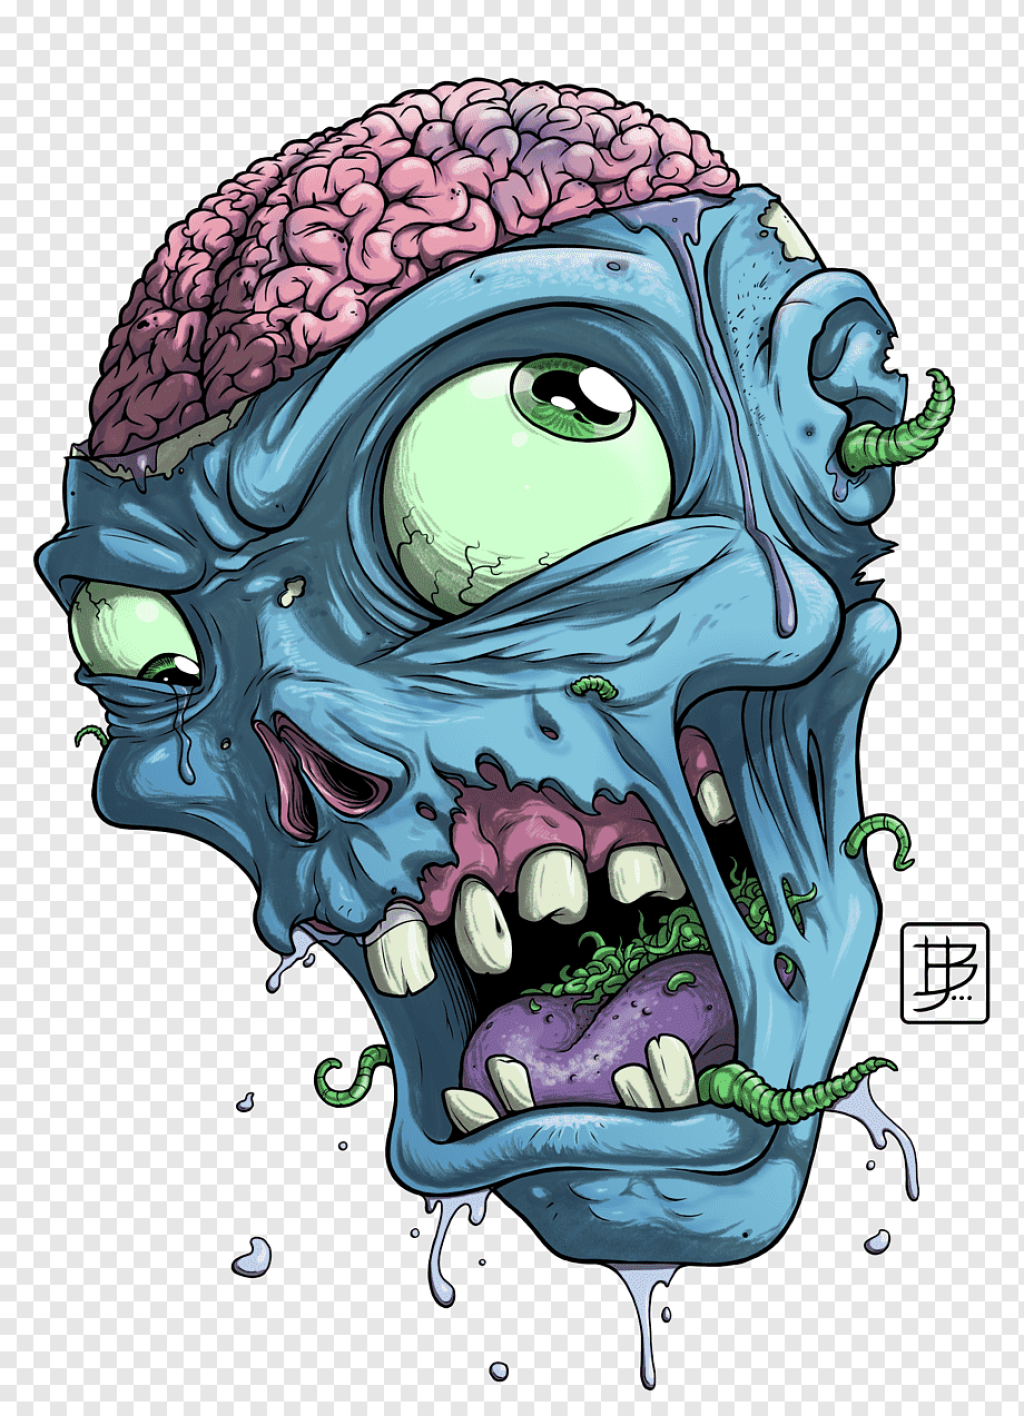 Picture of: Zombie art, Drawing Zombie Sketch, zombie, face, head, cartoon png